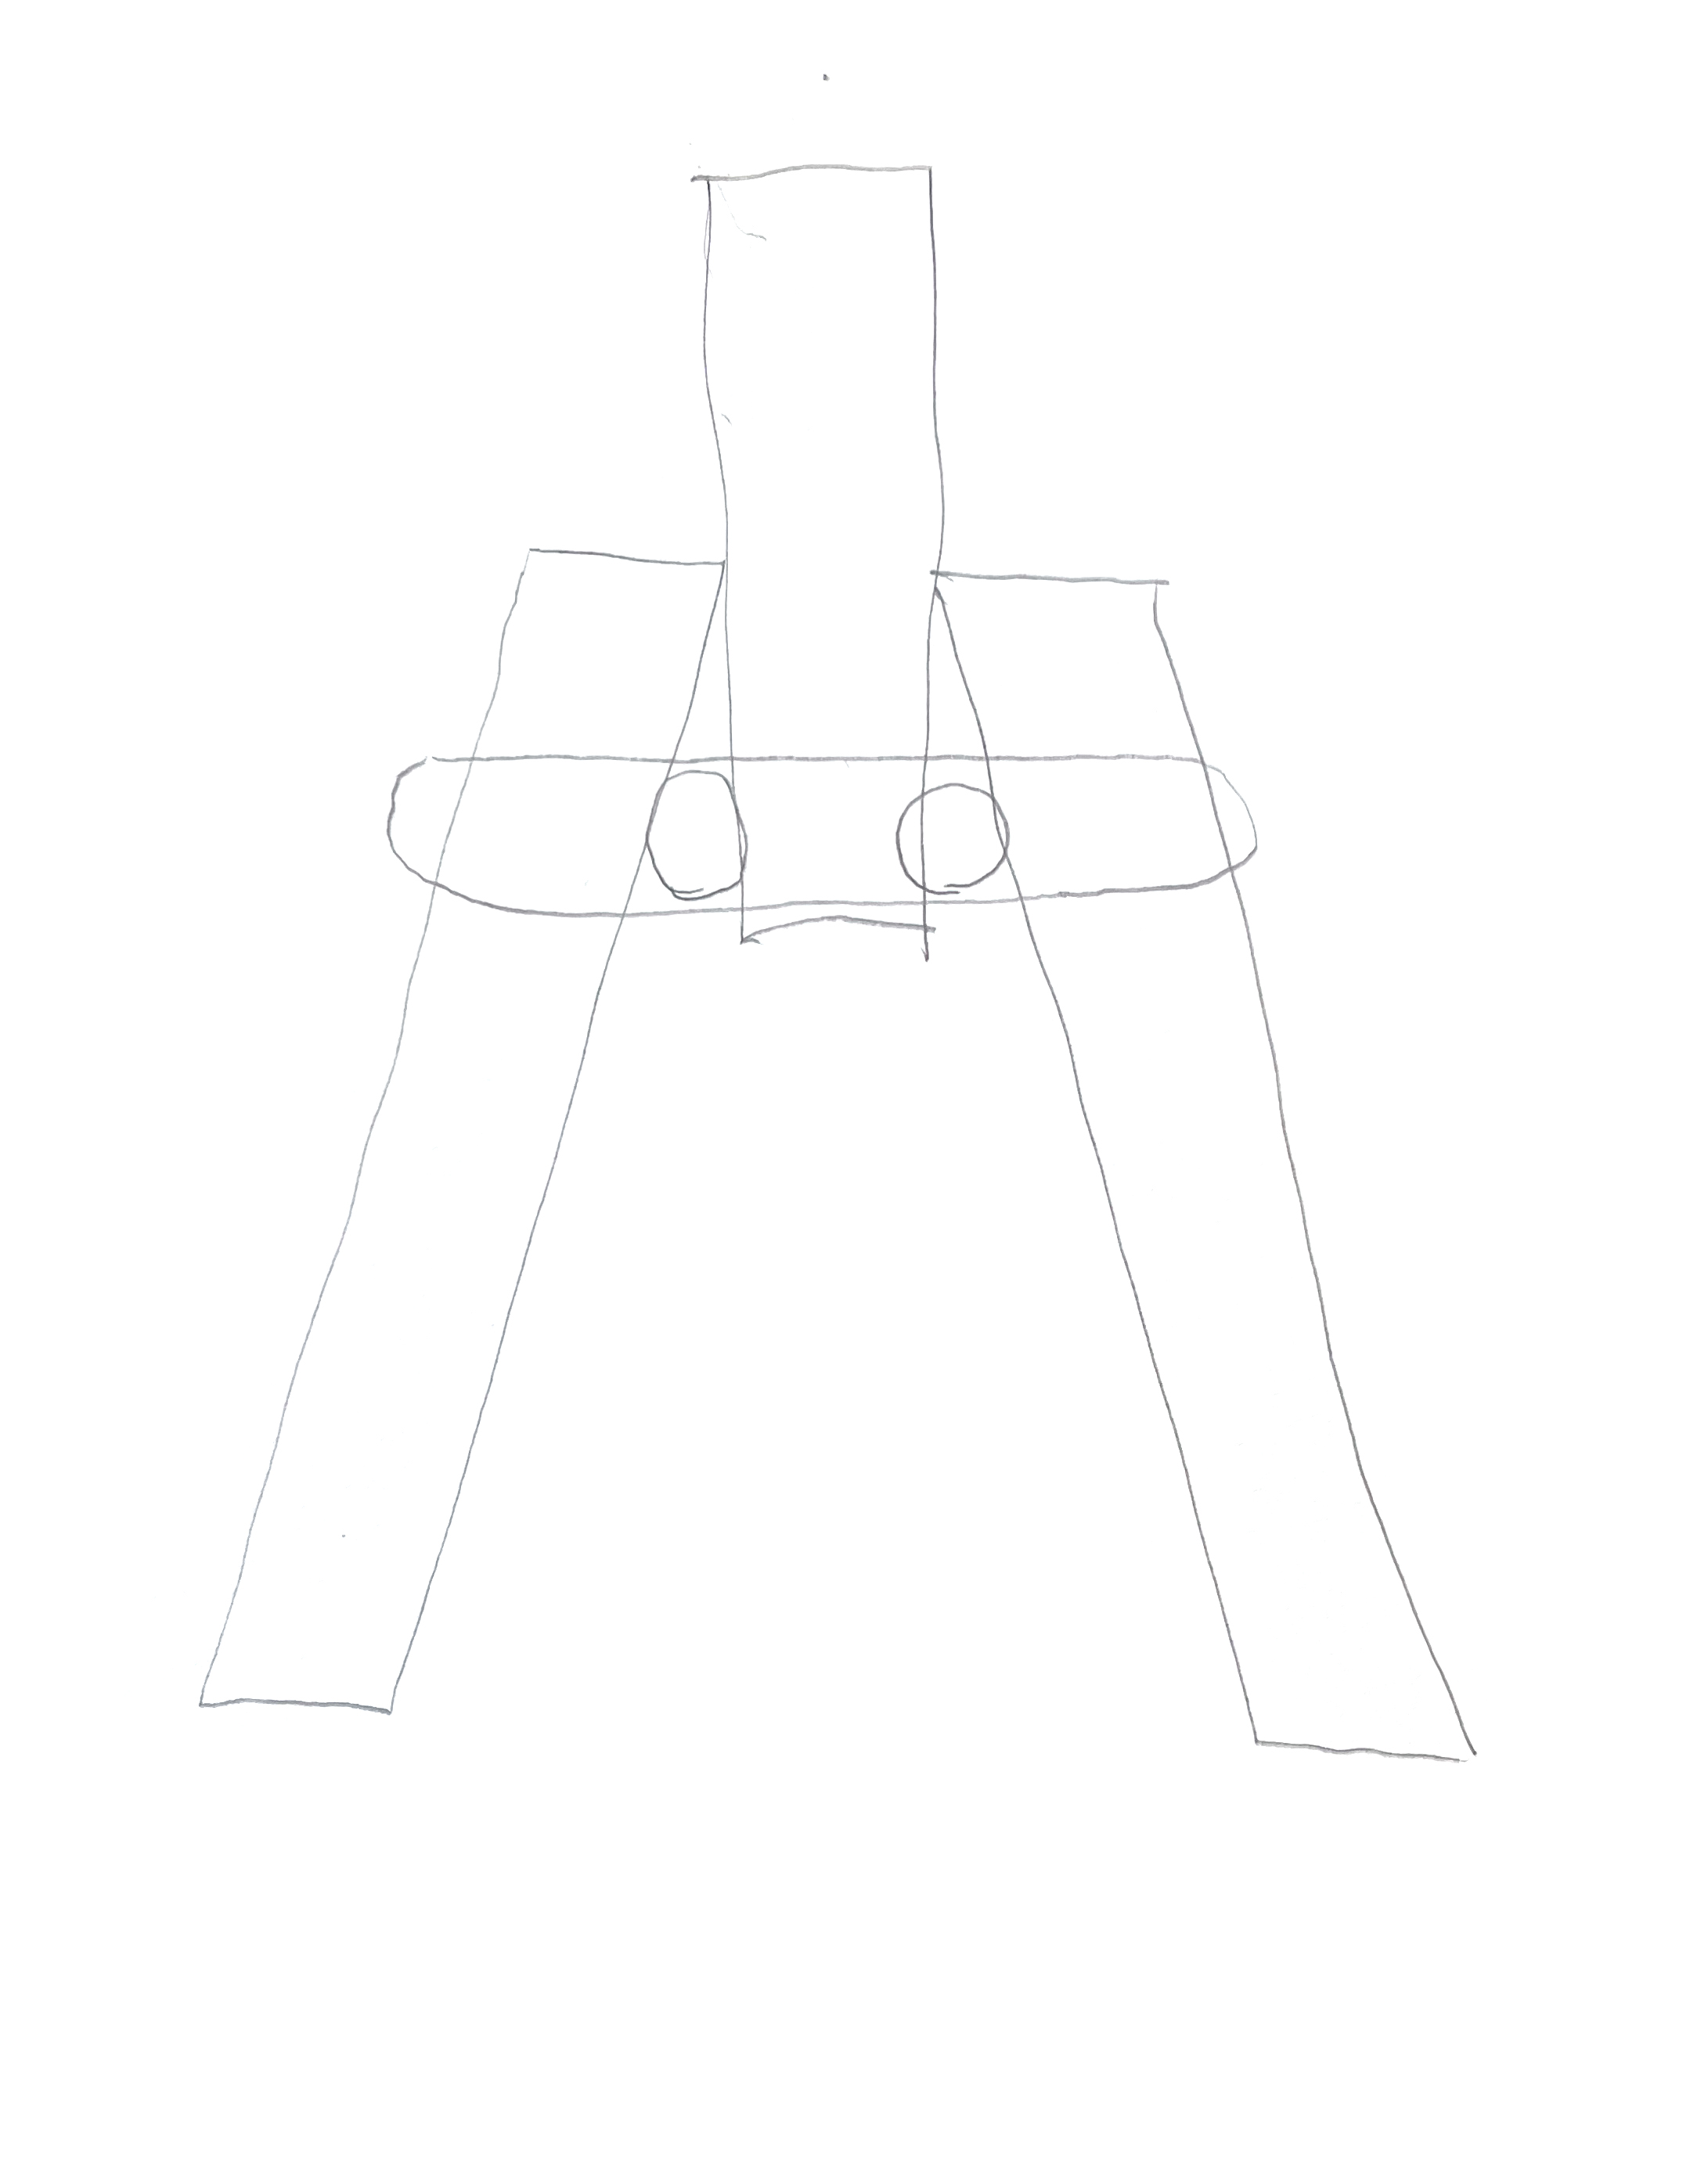 sketch in pencil of two sloped legs and a middle post, joined together in the middle